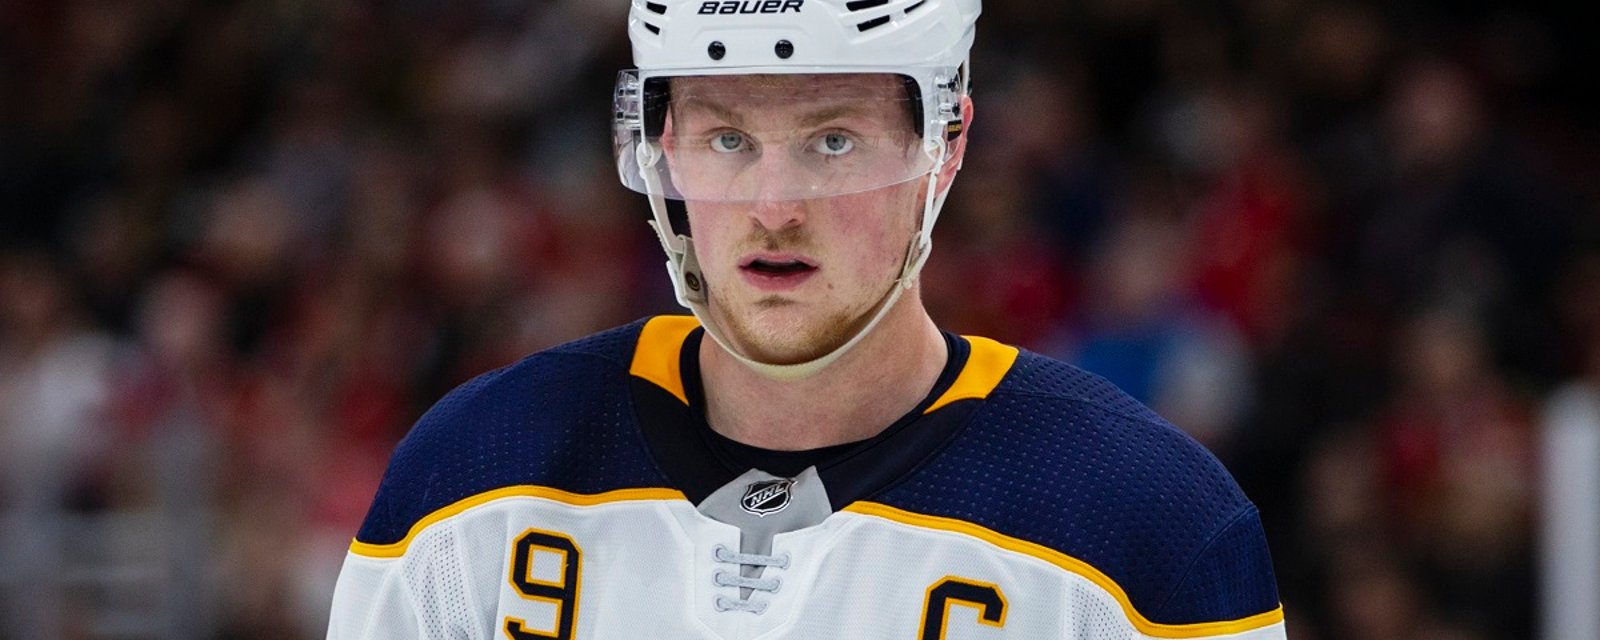 NHL executives predict Jack Eichel is headed to one of two teams.